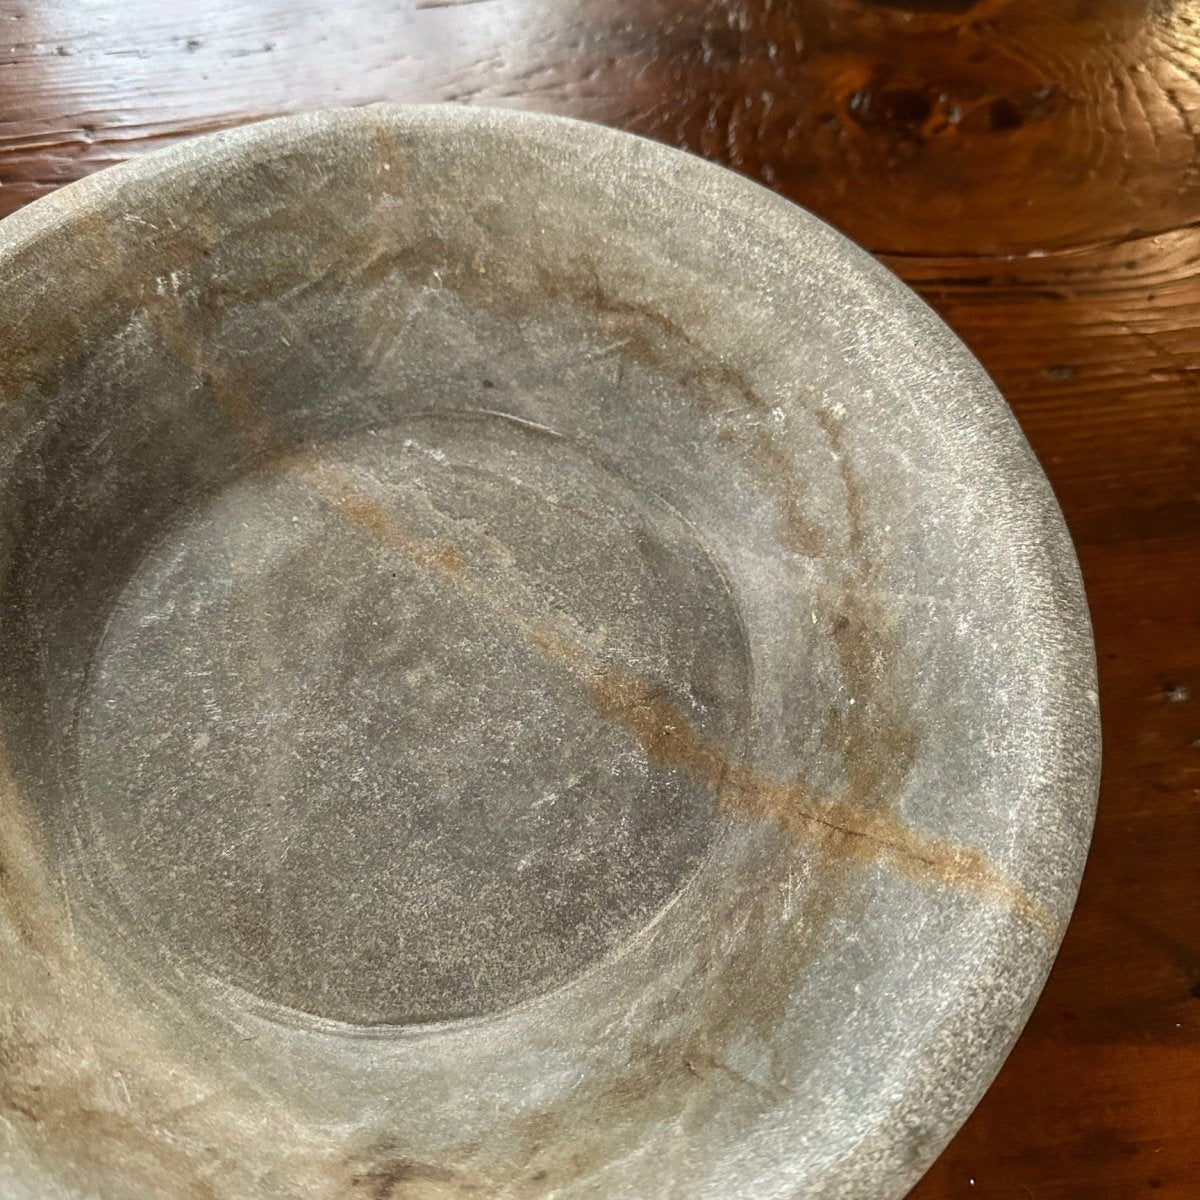 Large Marble Bowl - SpaceHavenHome